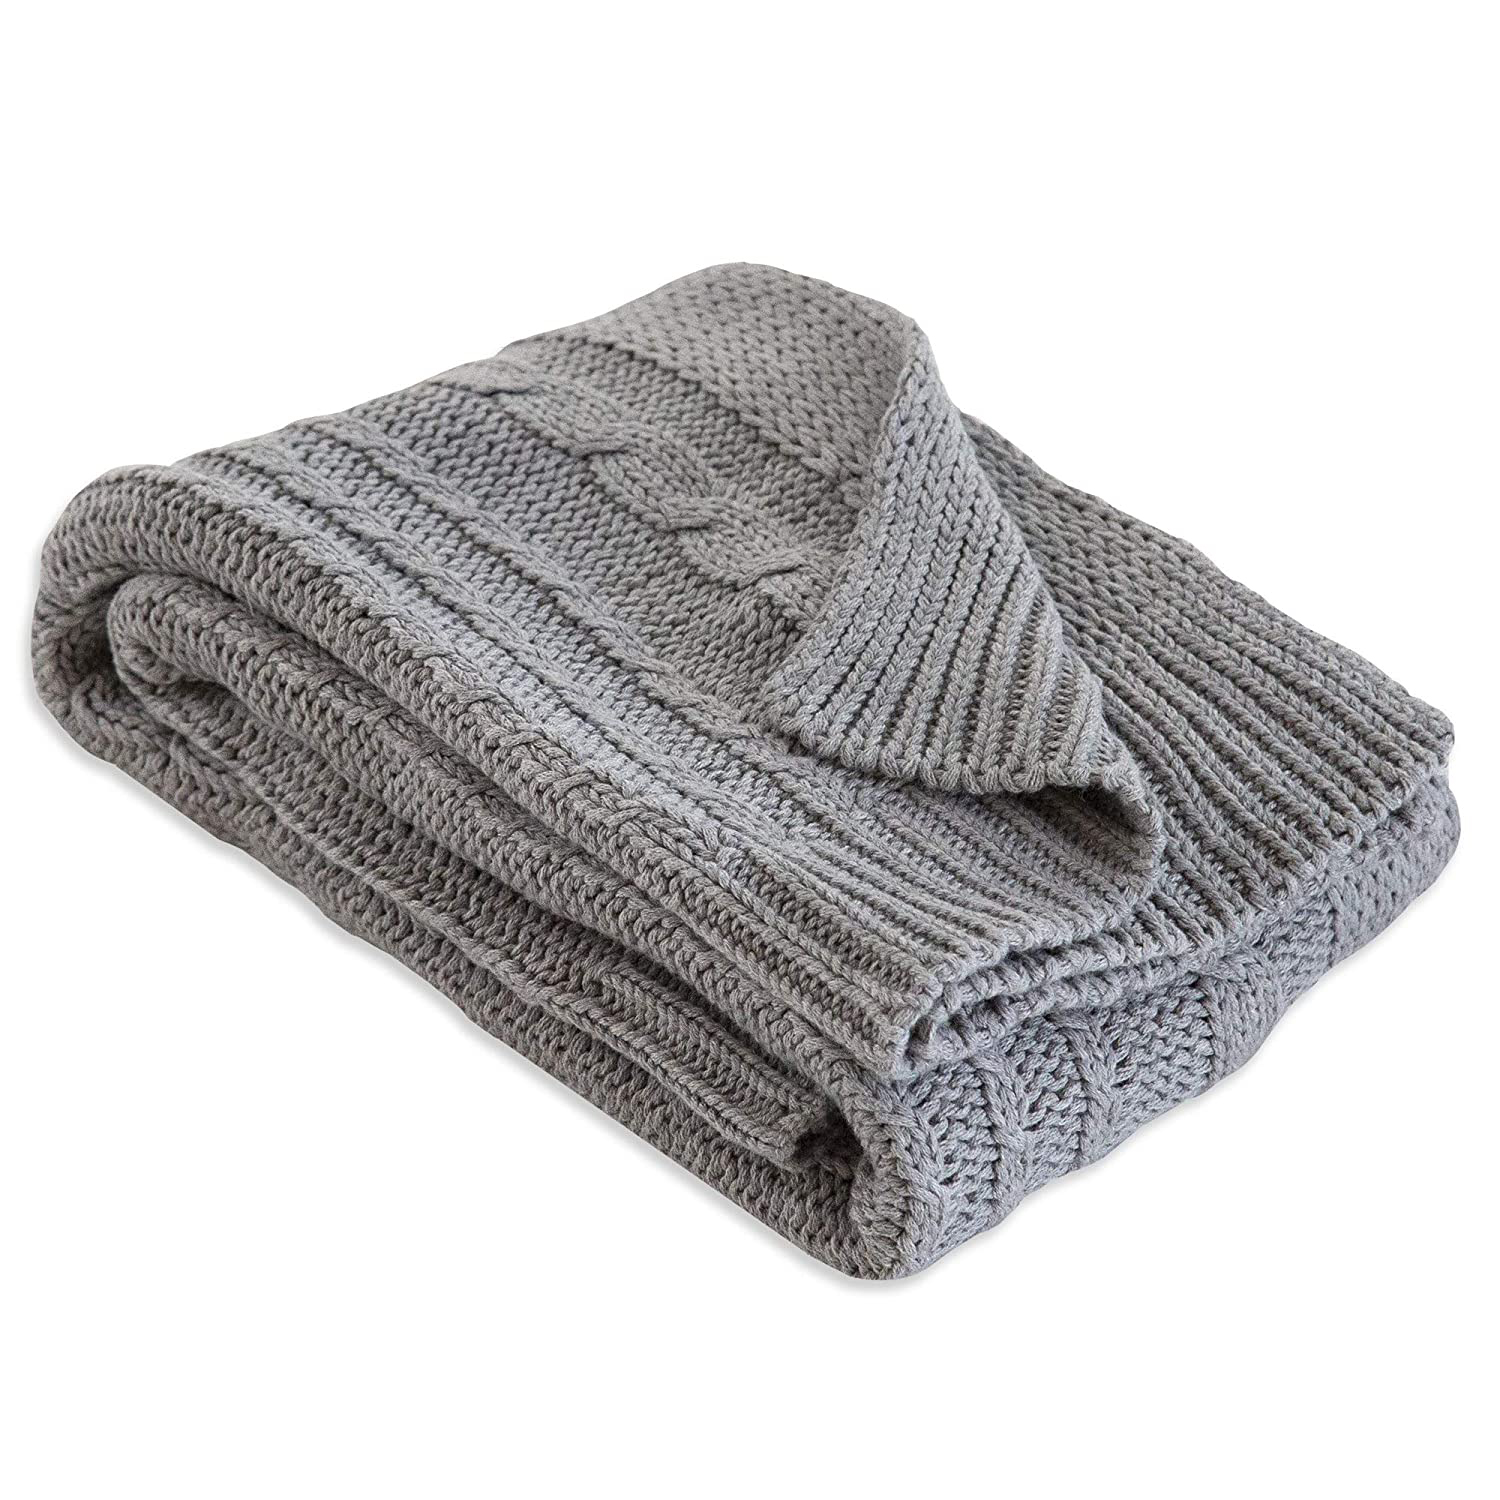 Burt’s Bees Baby Cable Knit Blanket